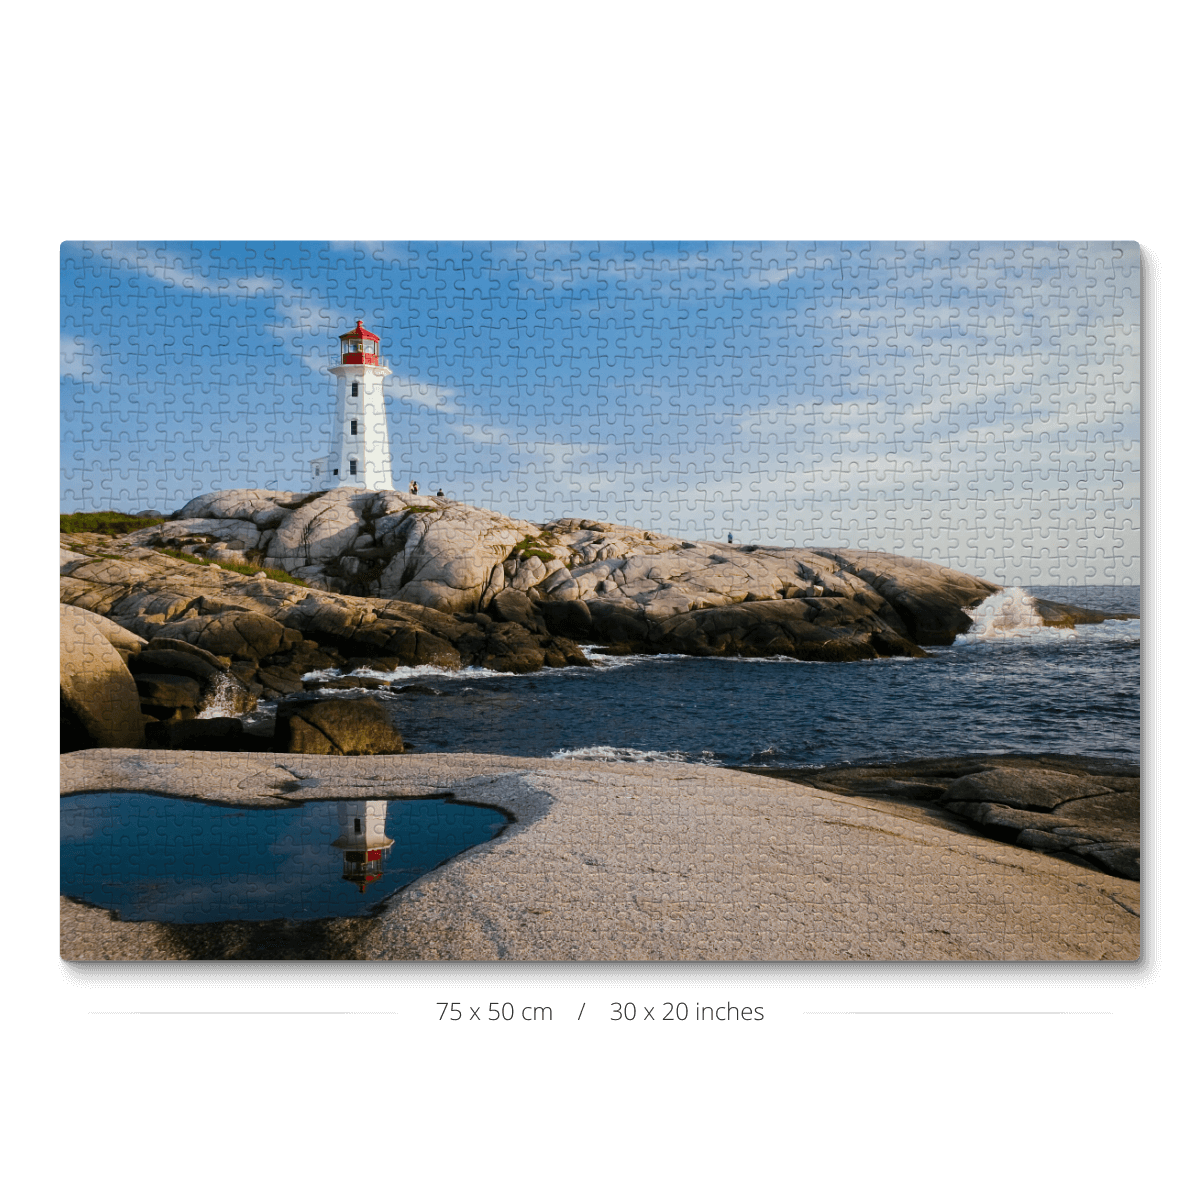 A 1000-piece jigsaw puzzle featuring Peggy's Cove lighthouse, a scenic photo of a famous Canadian landmark.